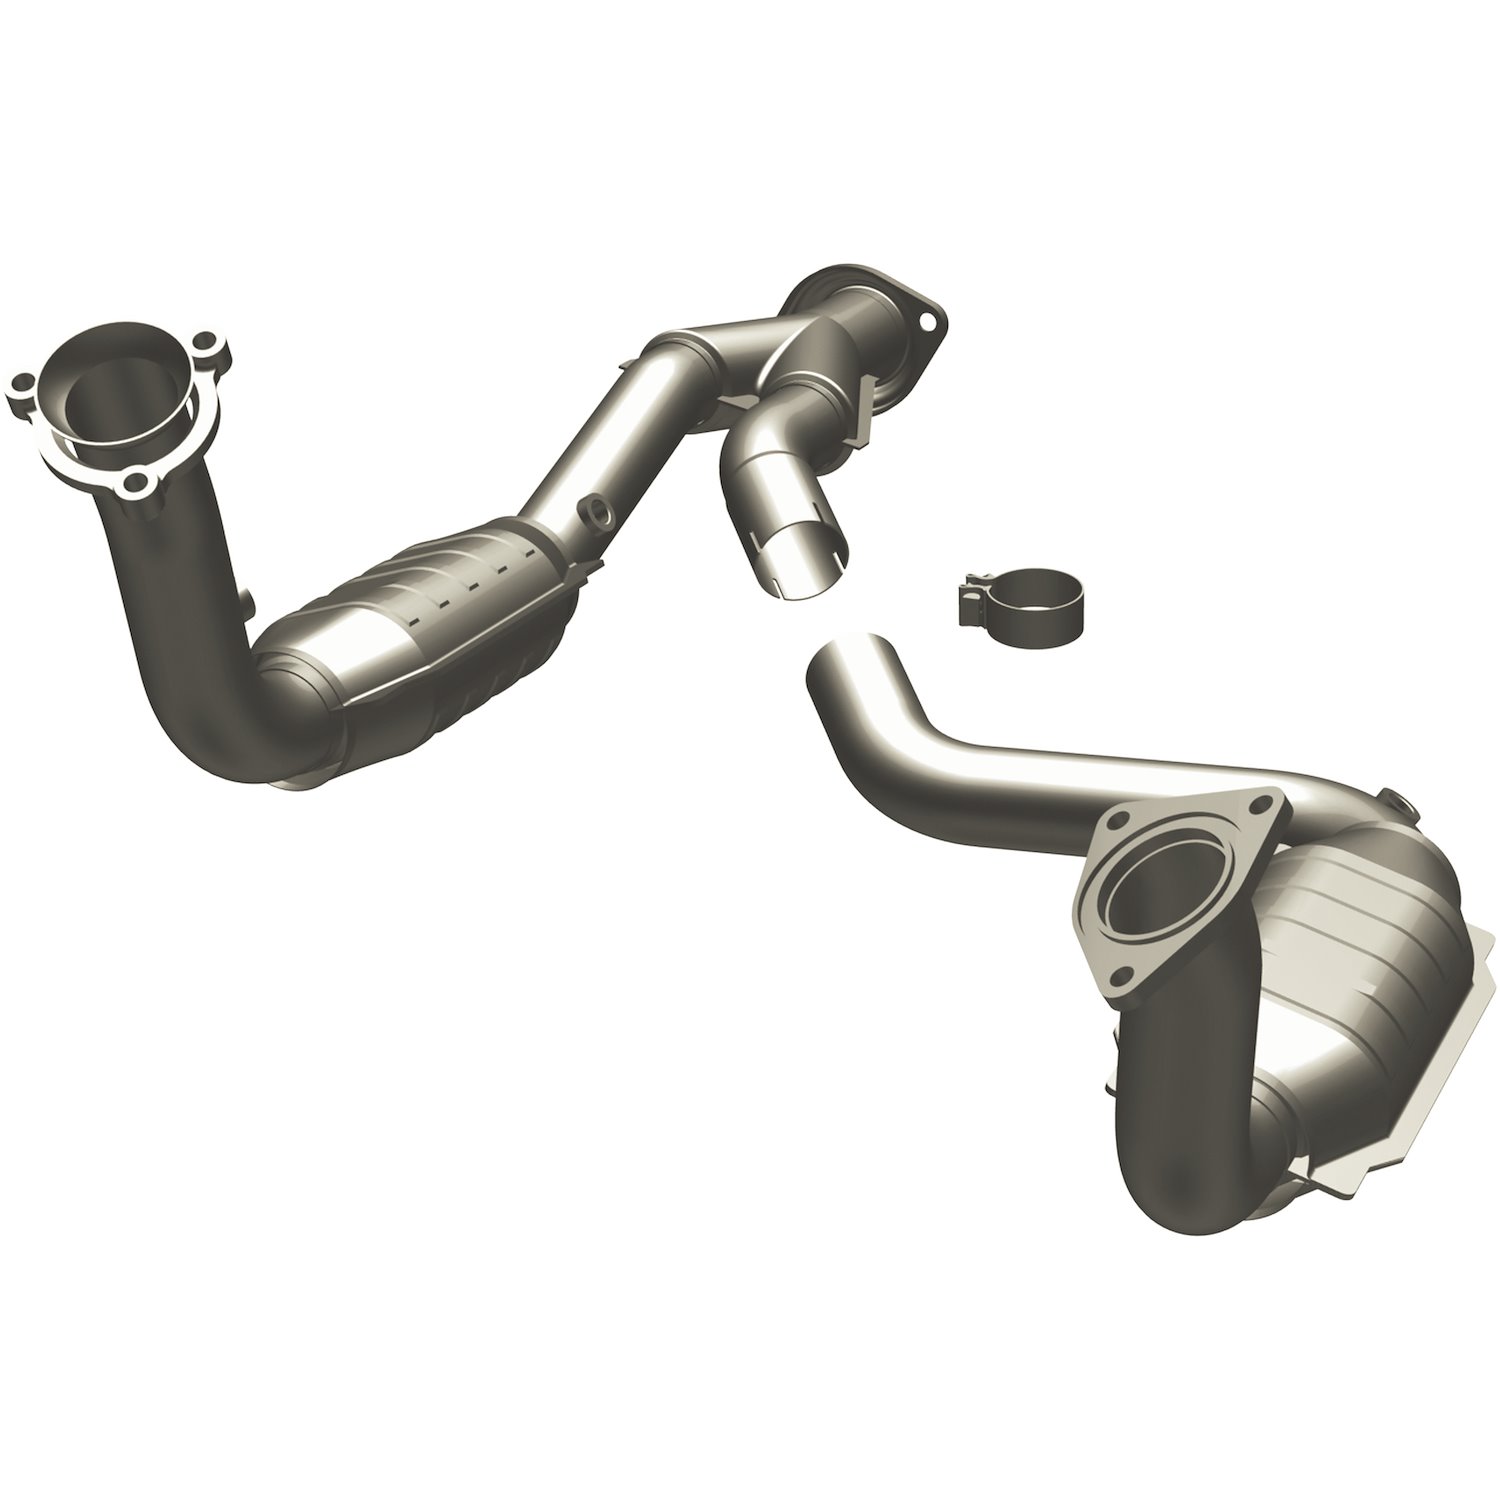 Direct-Fit Catalytic Converter 2003-06 Chevy SSR 5.3L/6.0L